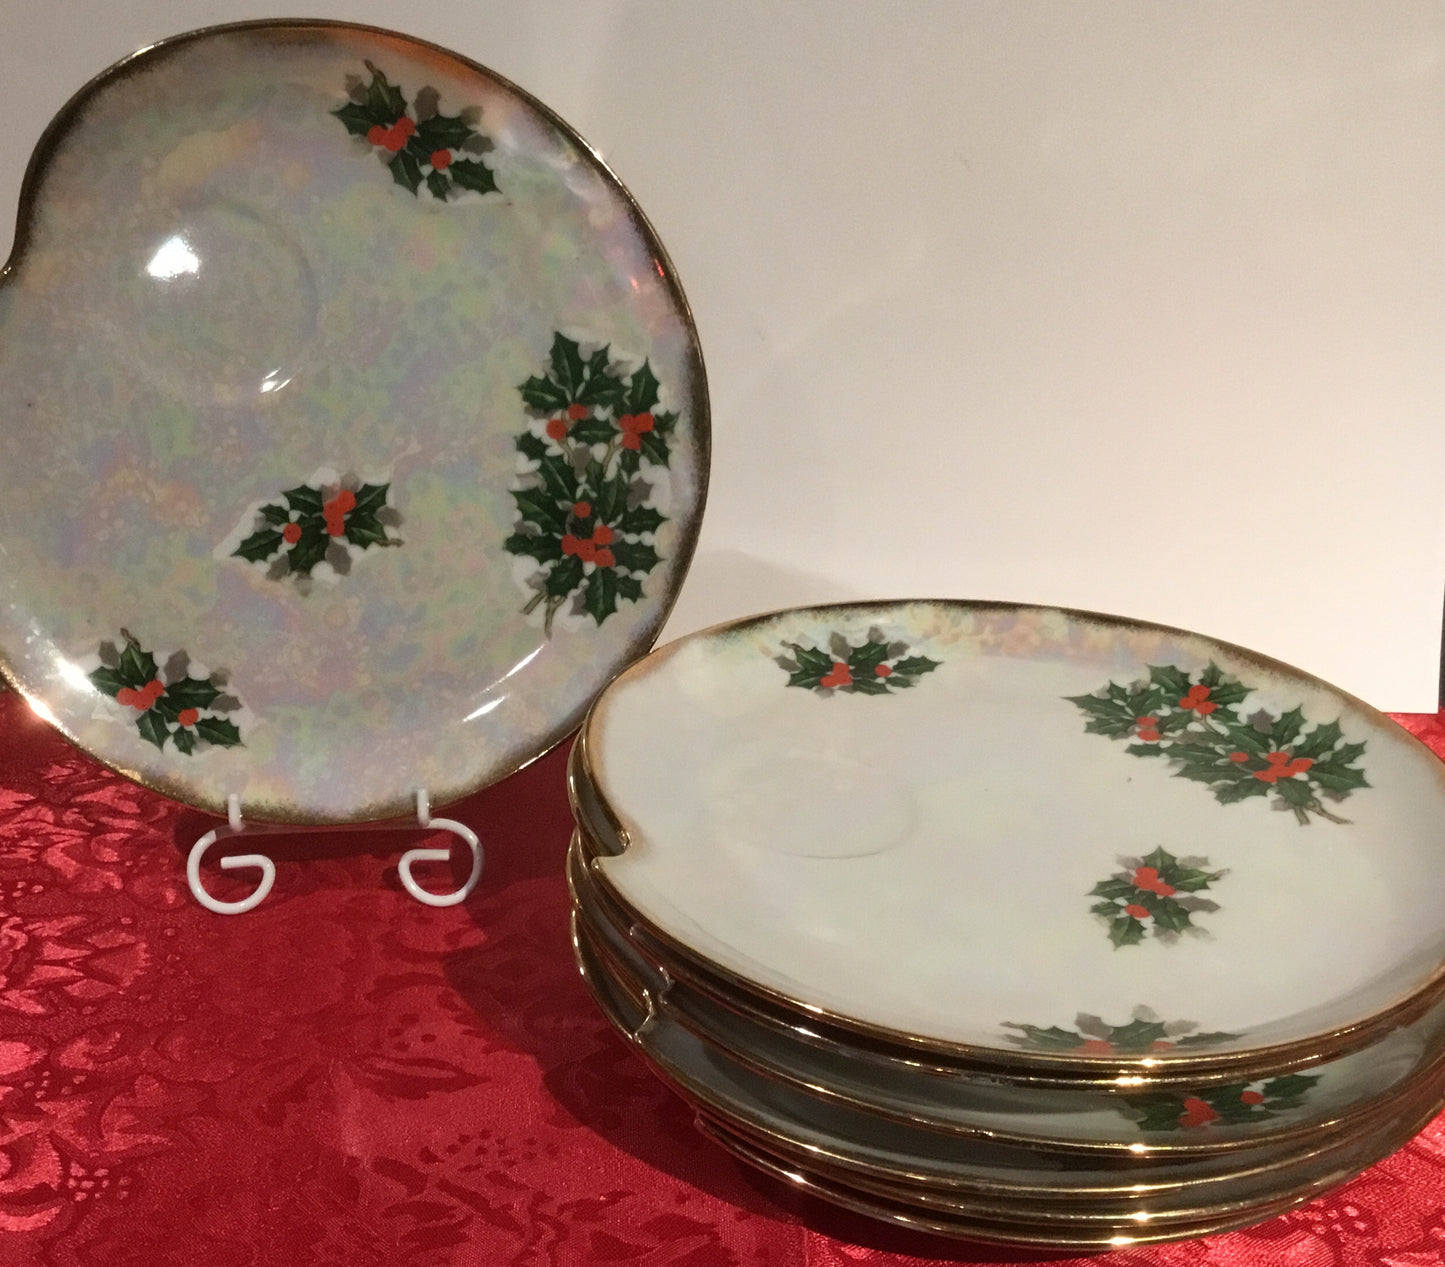 Vintage Ucagco Holly Berries Christmas Holiday Snack Plates, Set of 6 - No Cups